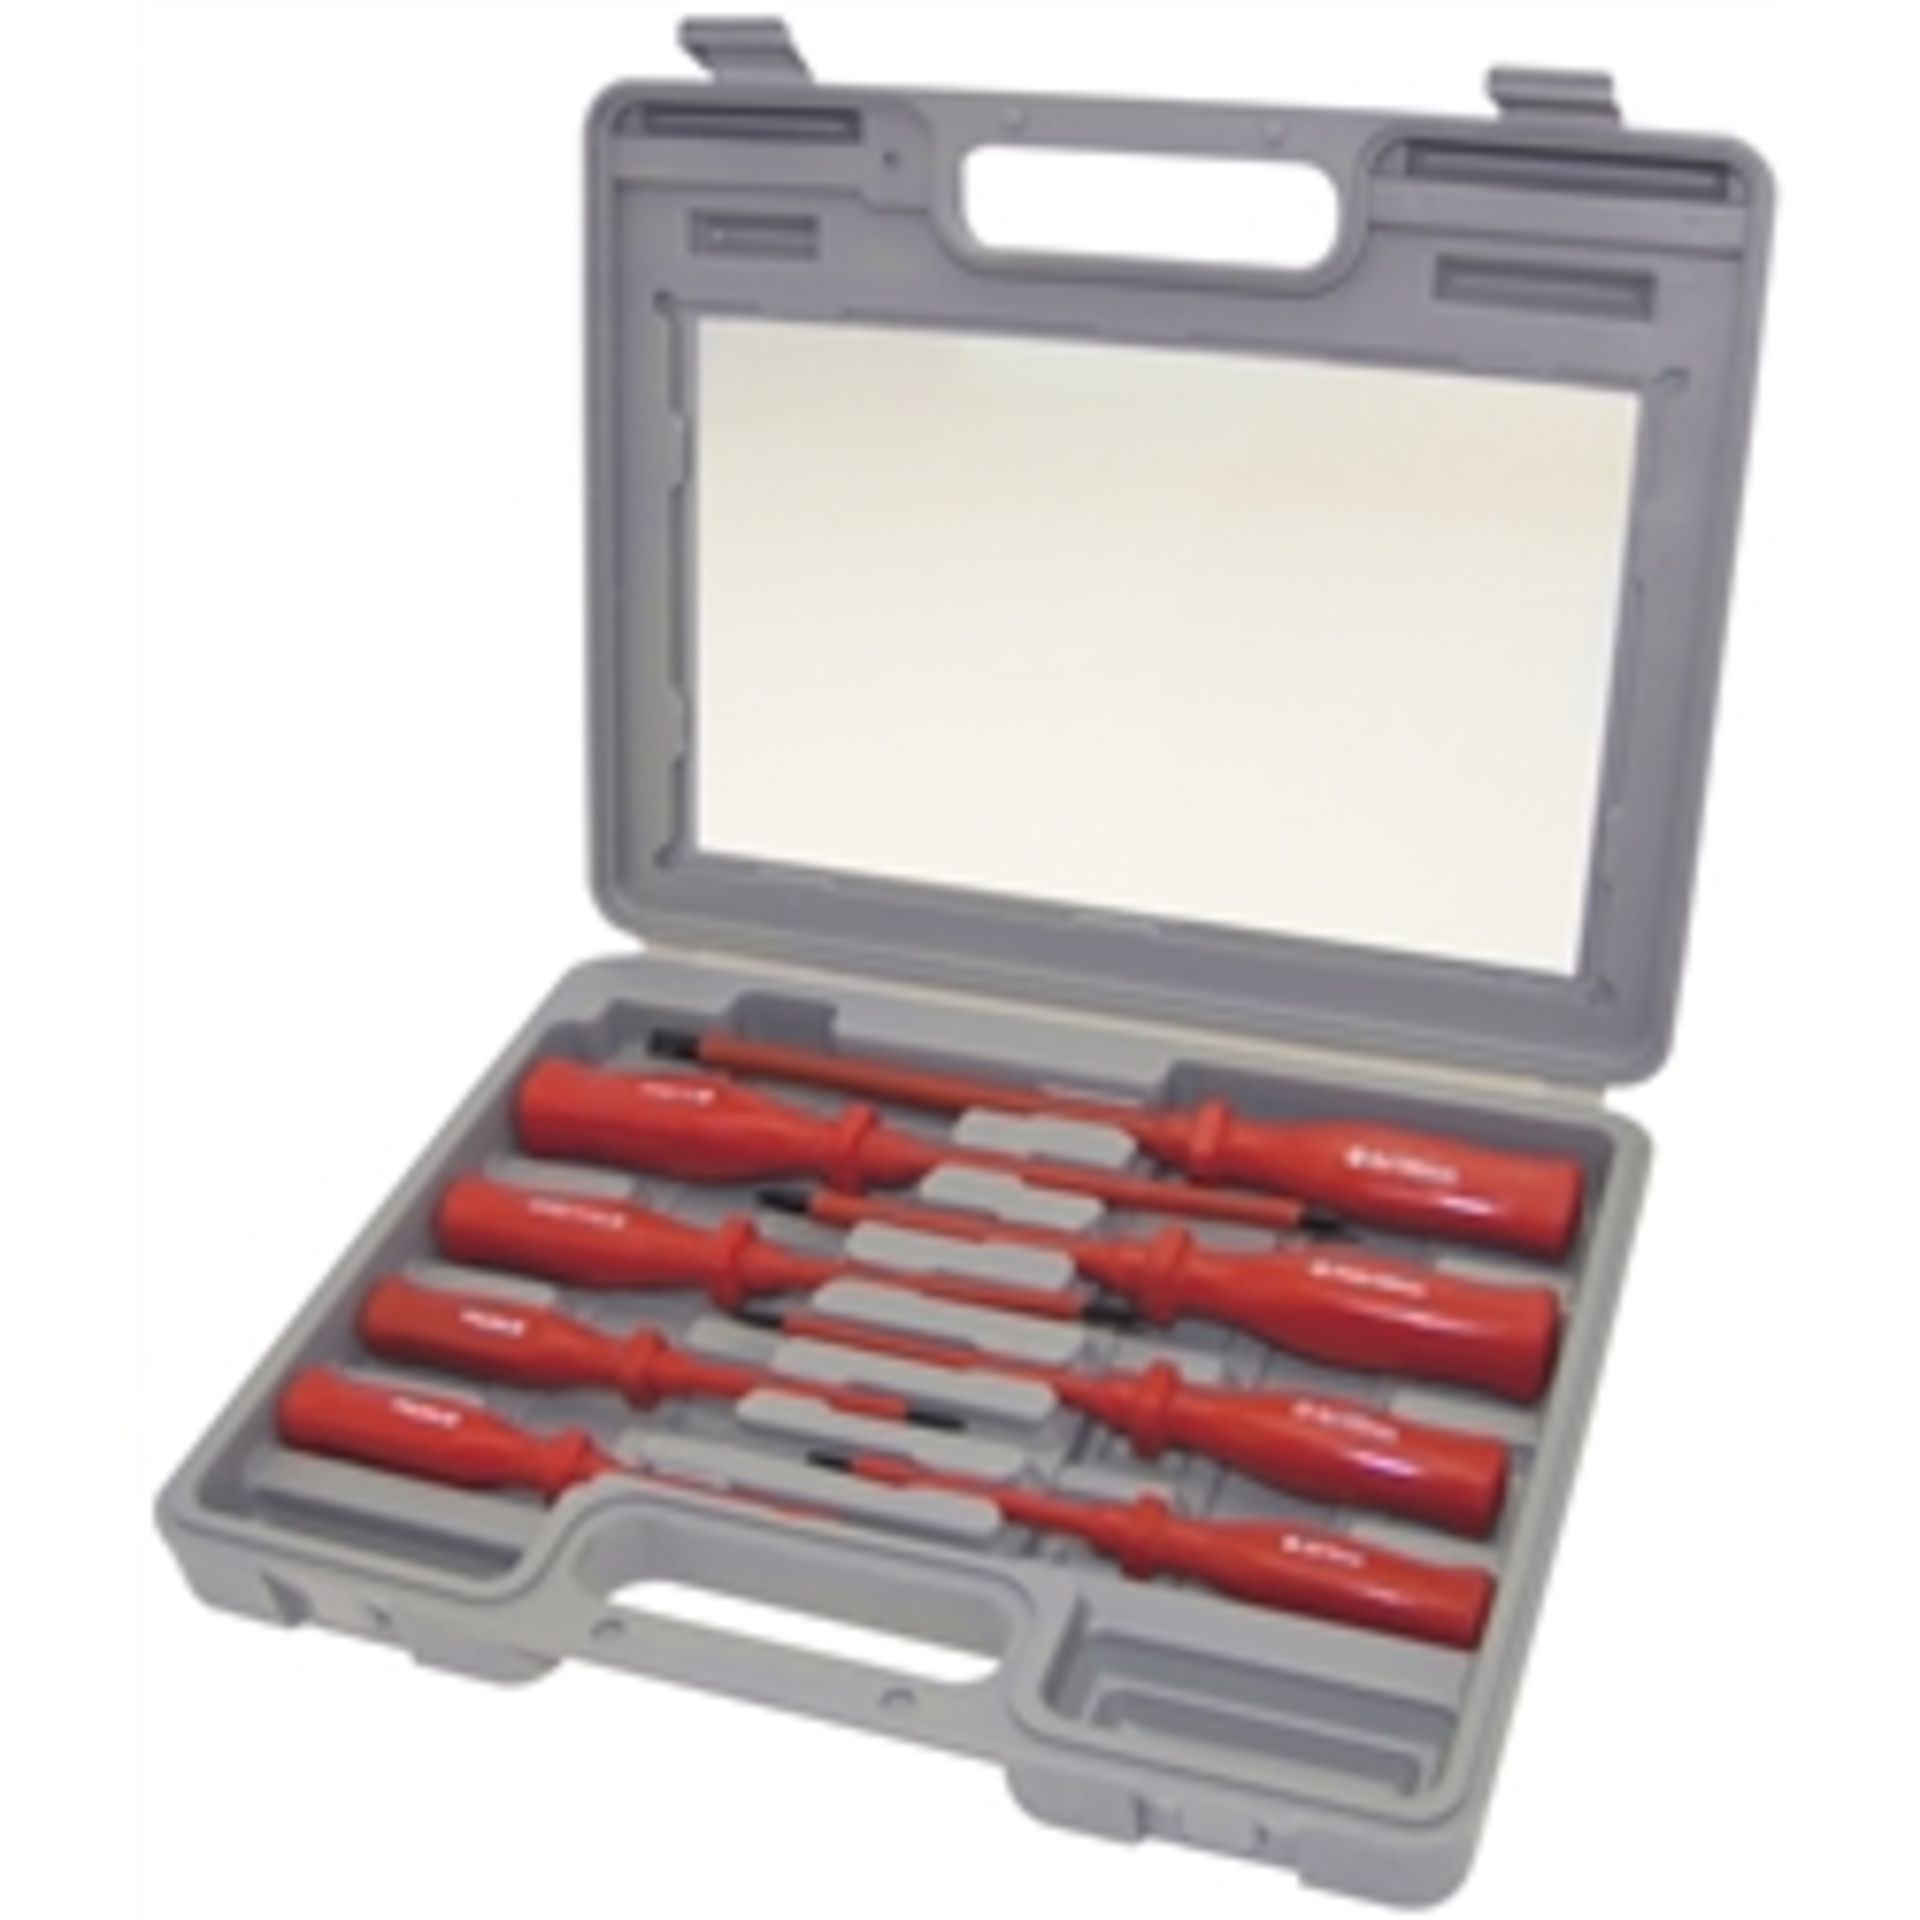 V Brand New Eight Piece Screwdriver Set In Carry case - Image 2 of 2